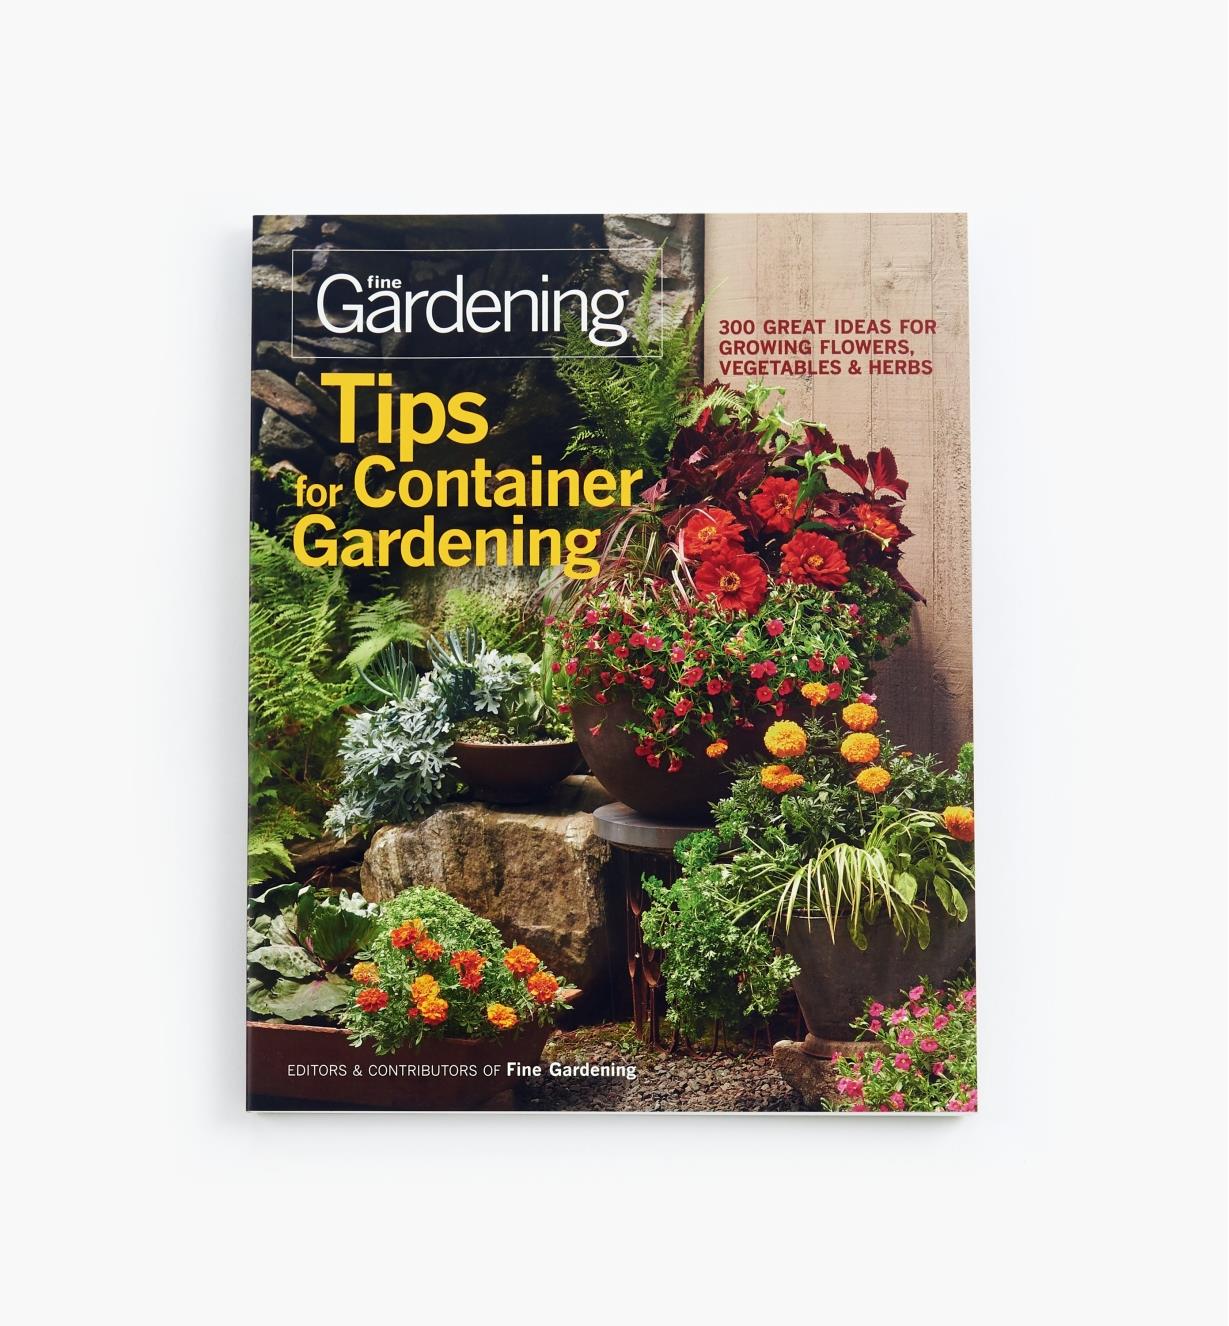 LA877 - Tips For Container Gardening